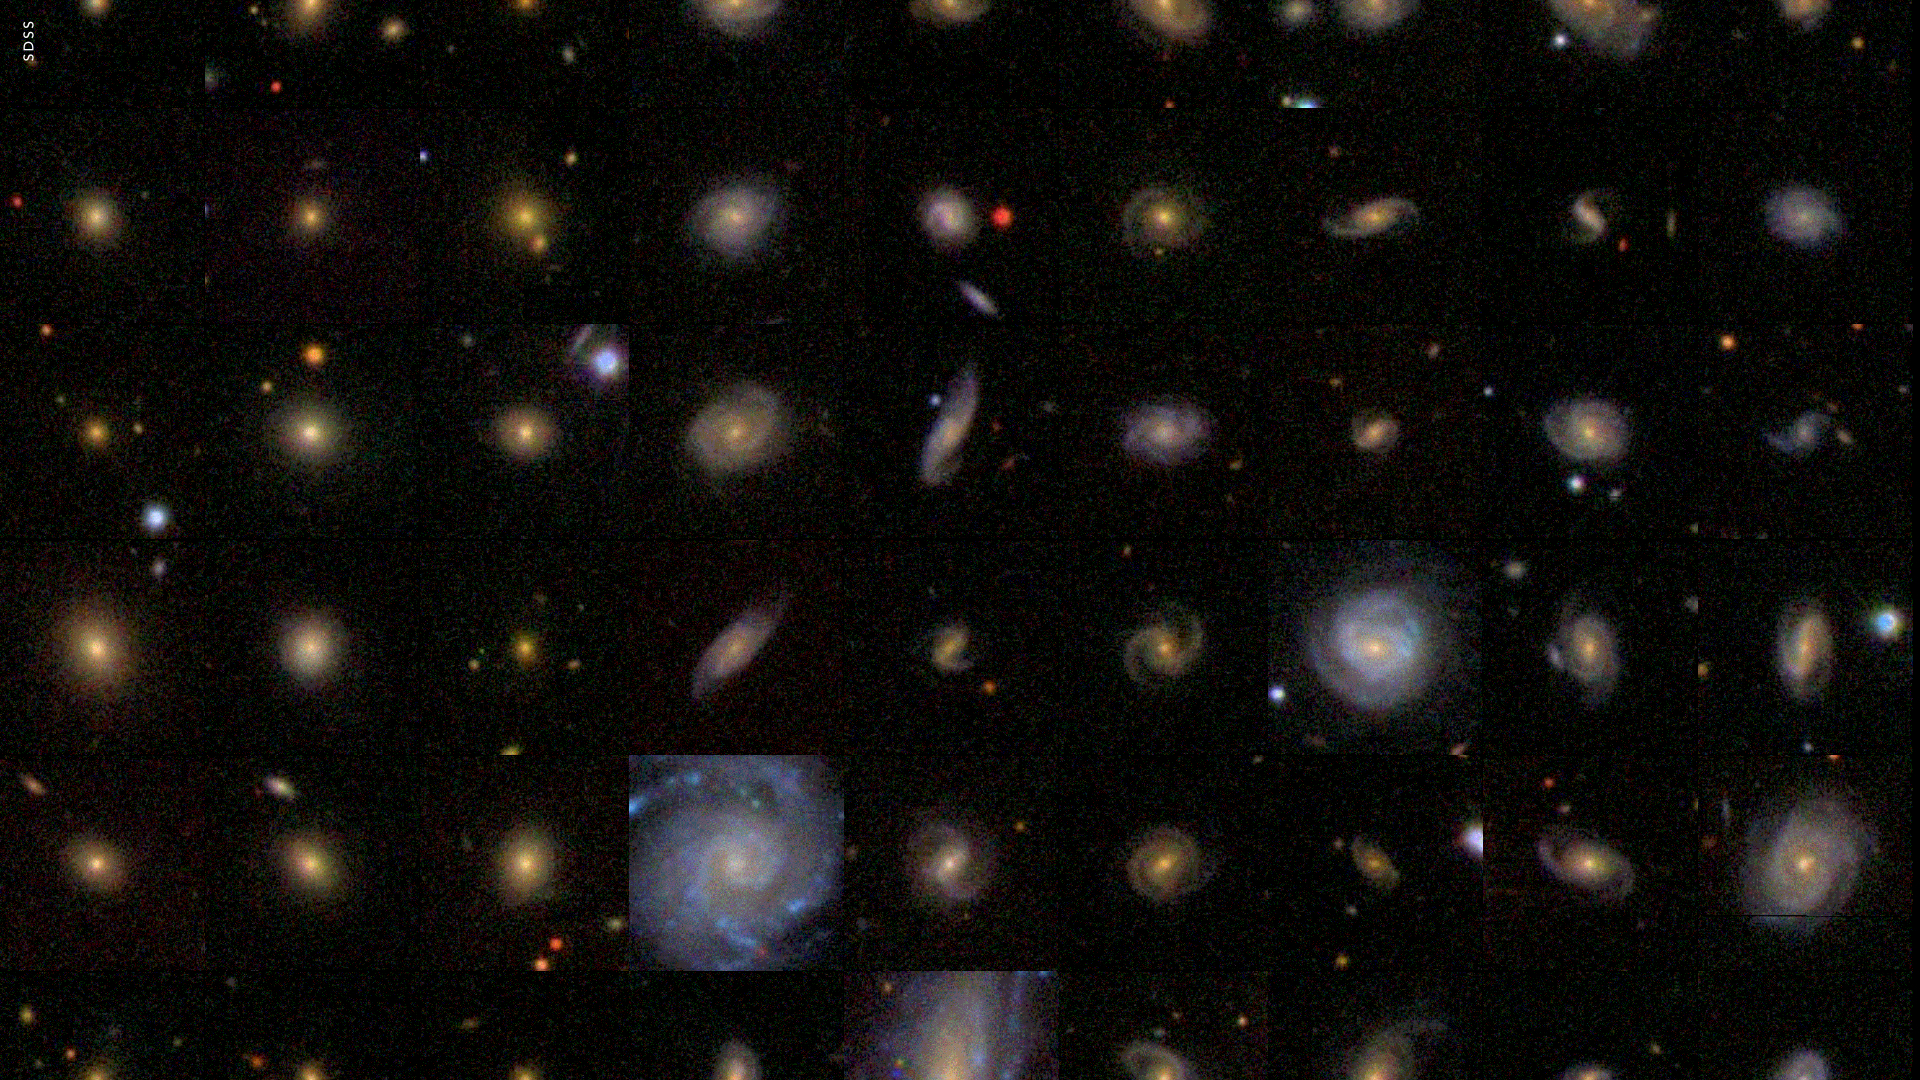 Examples of the different types of galaxies Zooniverse volunteers help categorize. Image: GalaxyZoo.org